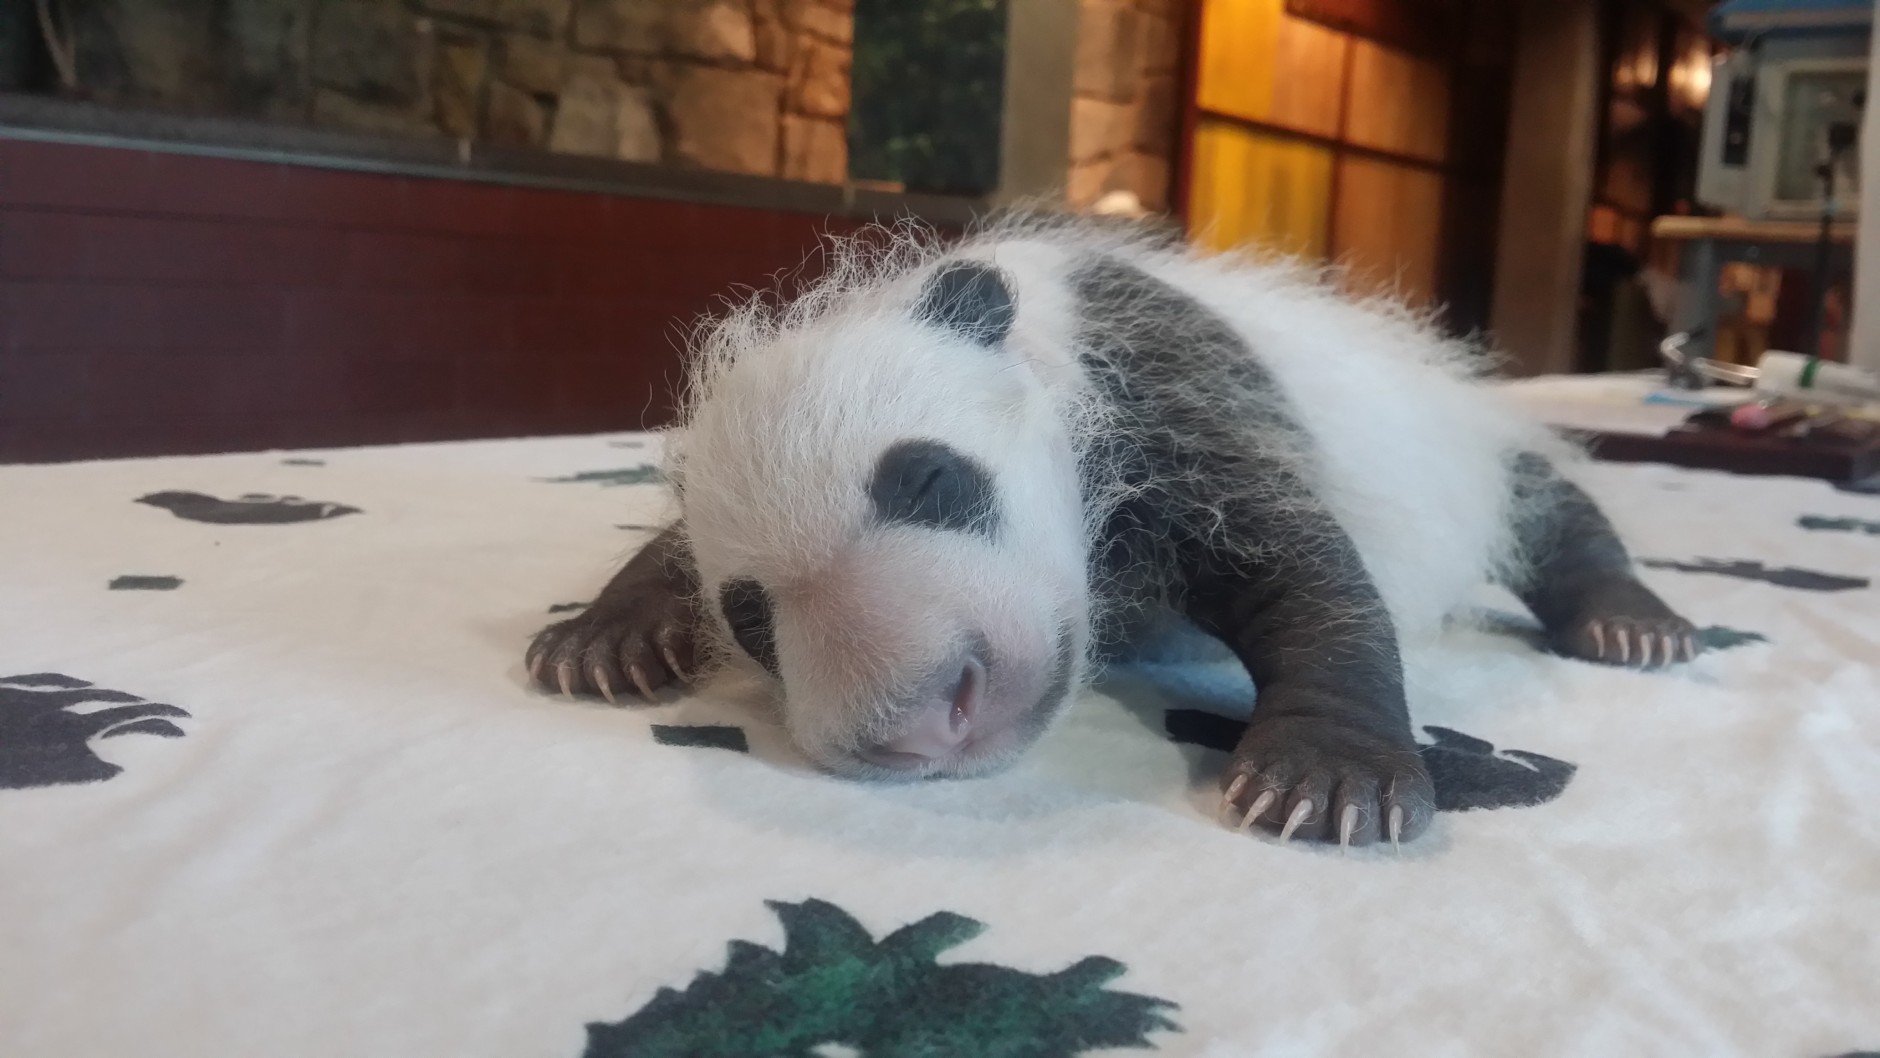 Keepers weighed the giant panda cub Sept. 14, when Mei Xiang left her den. He weighed 881.5 grams or 1.9 pounds. ( Erika Bauer/Smithsonian's National Zoo)